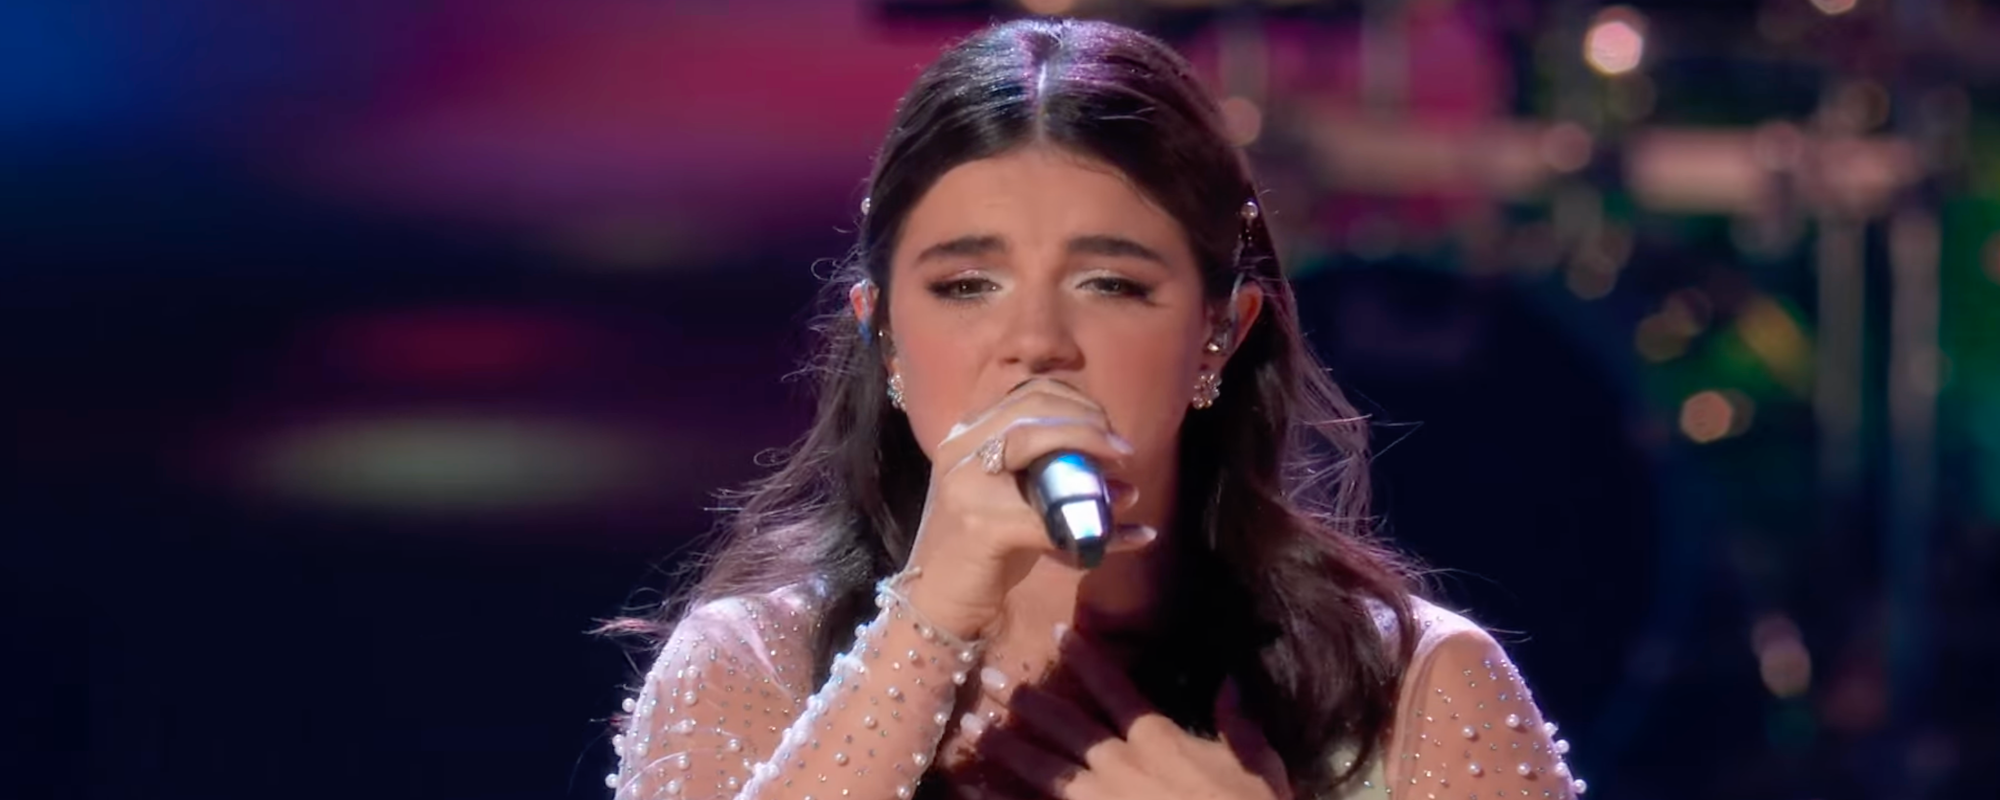 The Voice’s Julia Roome Makes Her Stunning Return to Team Niall Thanks to the New Playoff Super Save